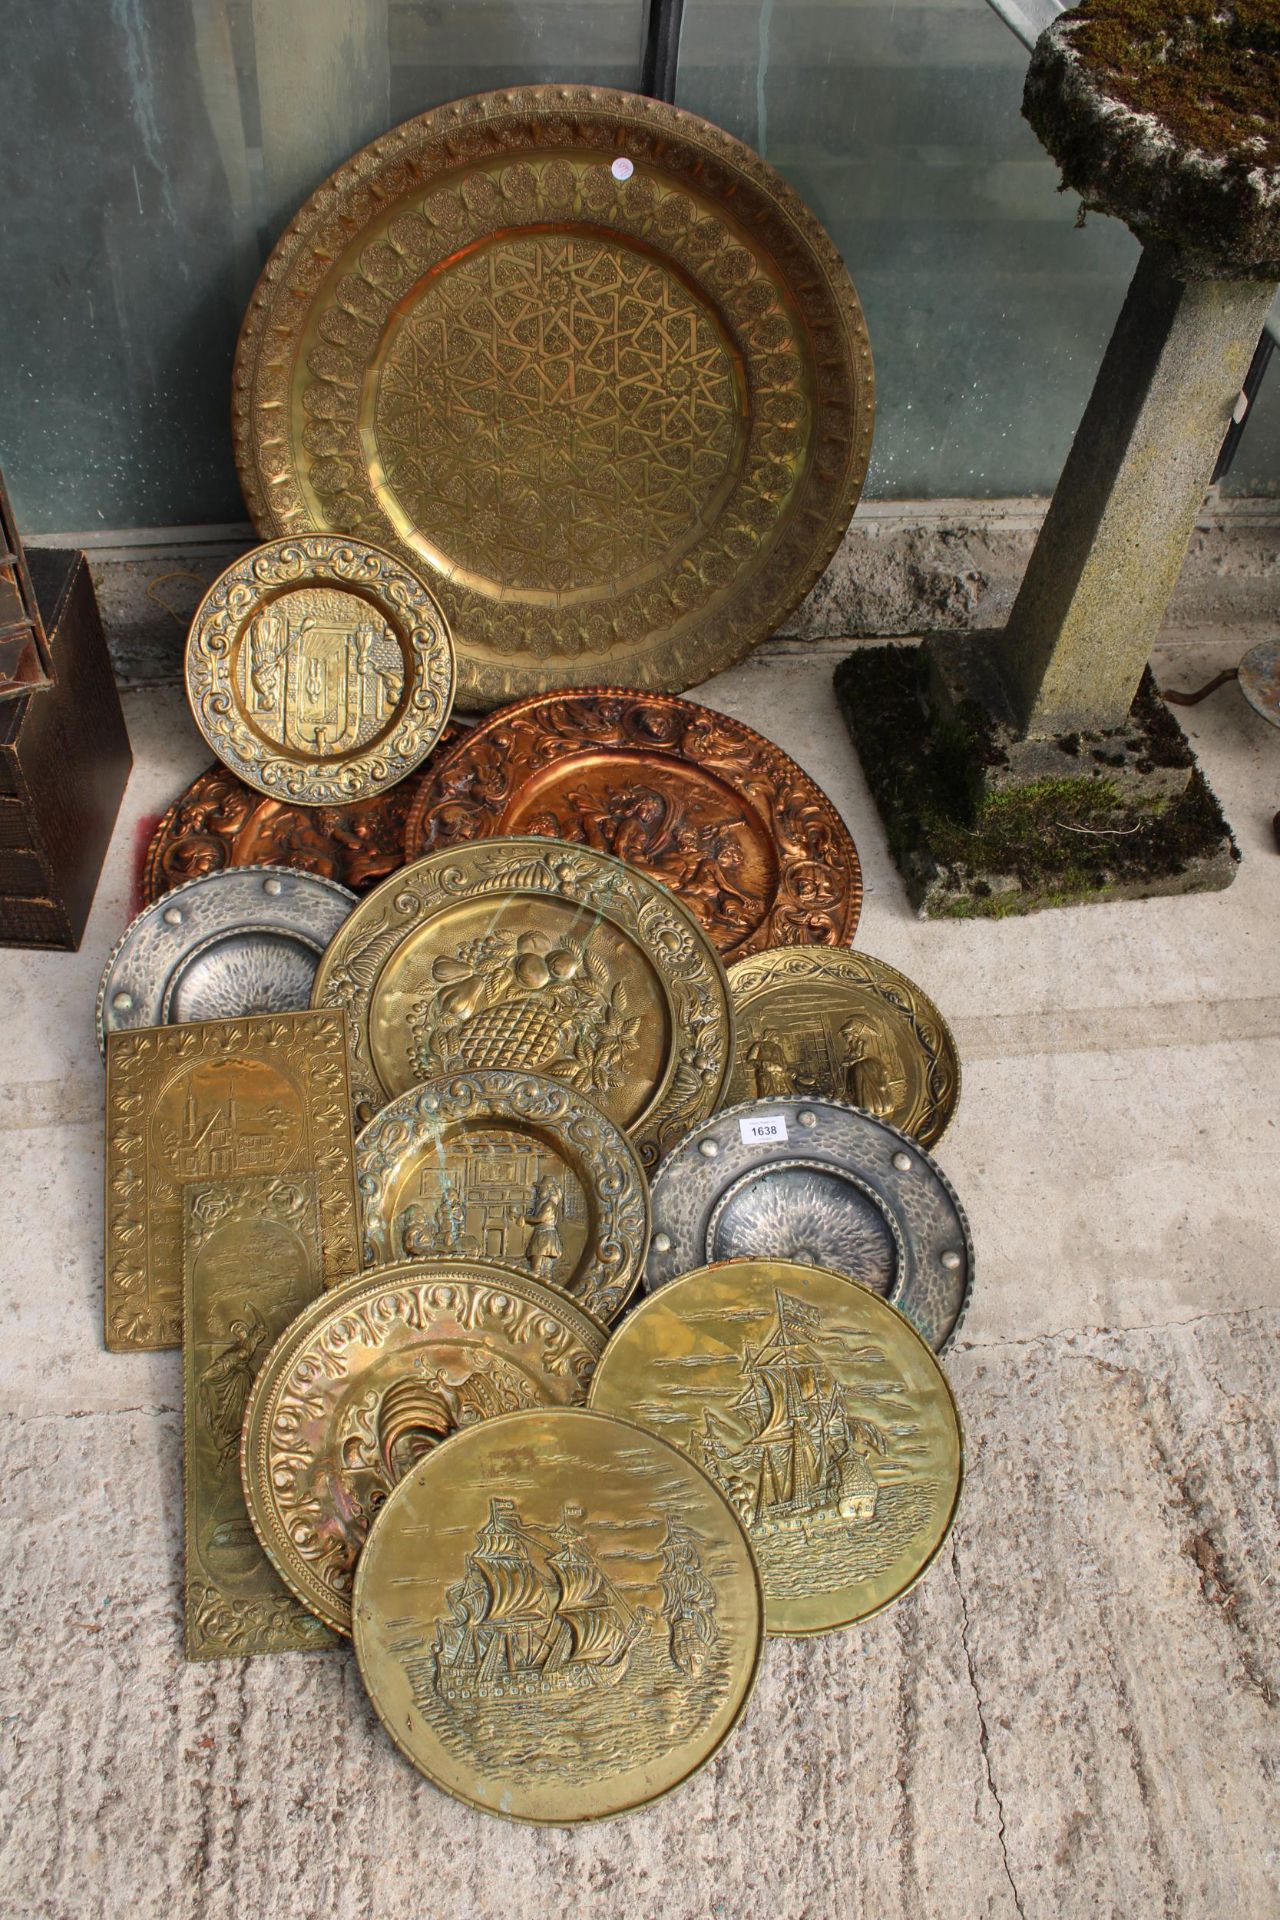 A LARGE ASSORTMENT OF VINTAGE BRASS AND COPPER WALL CHARGERS